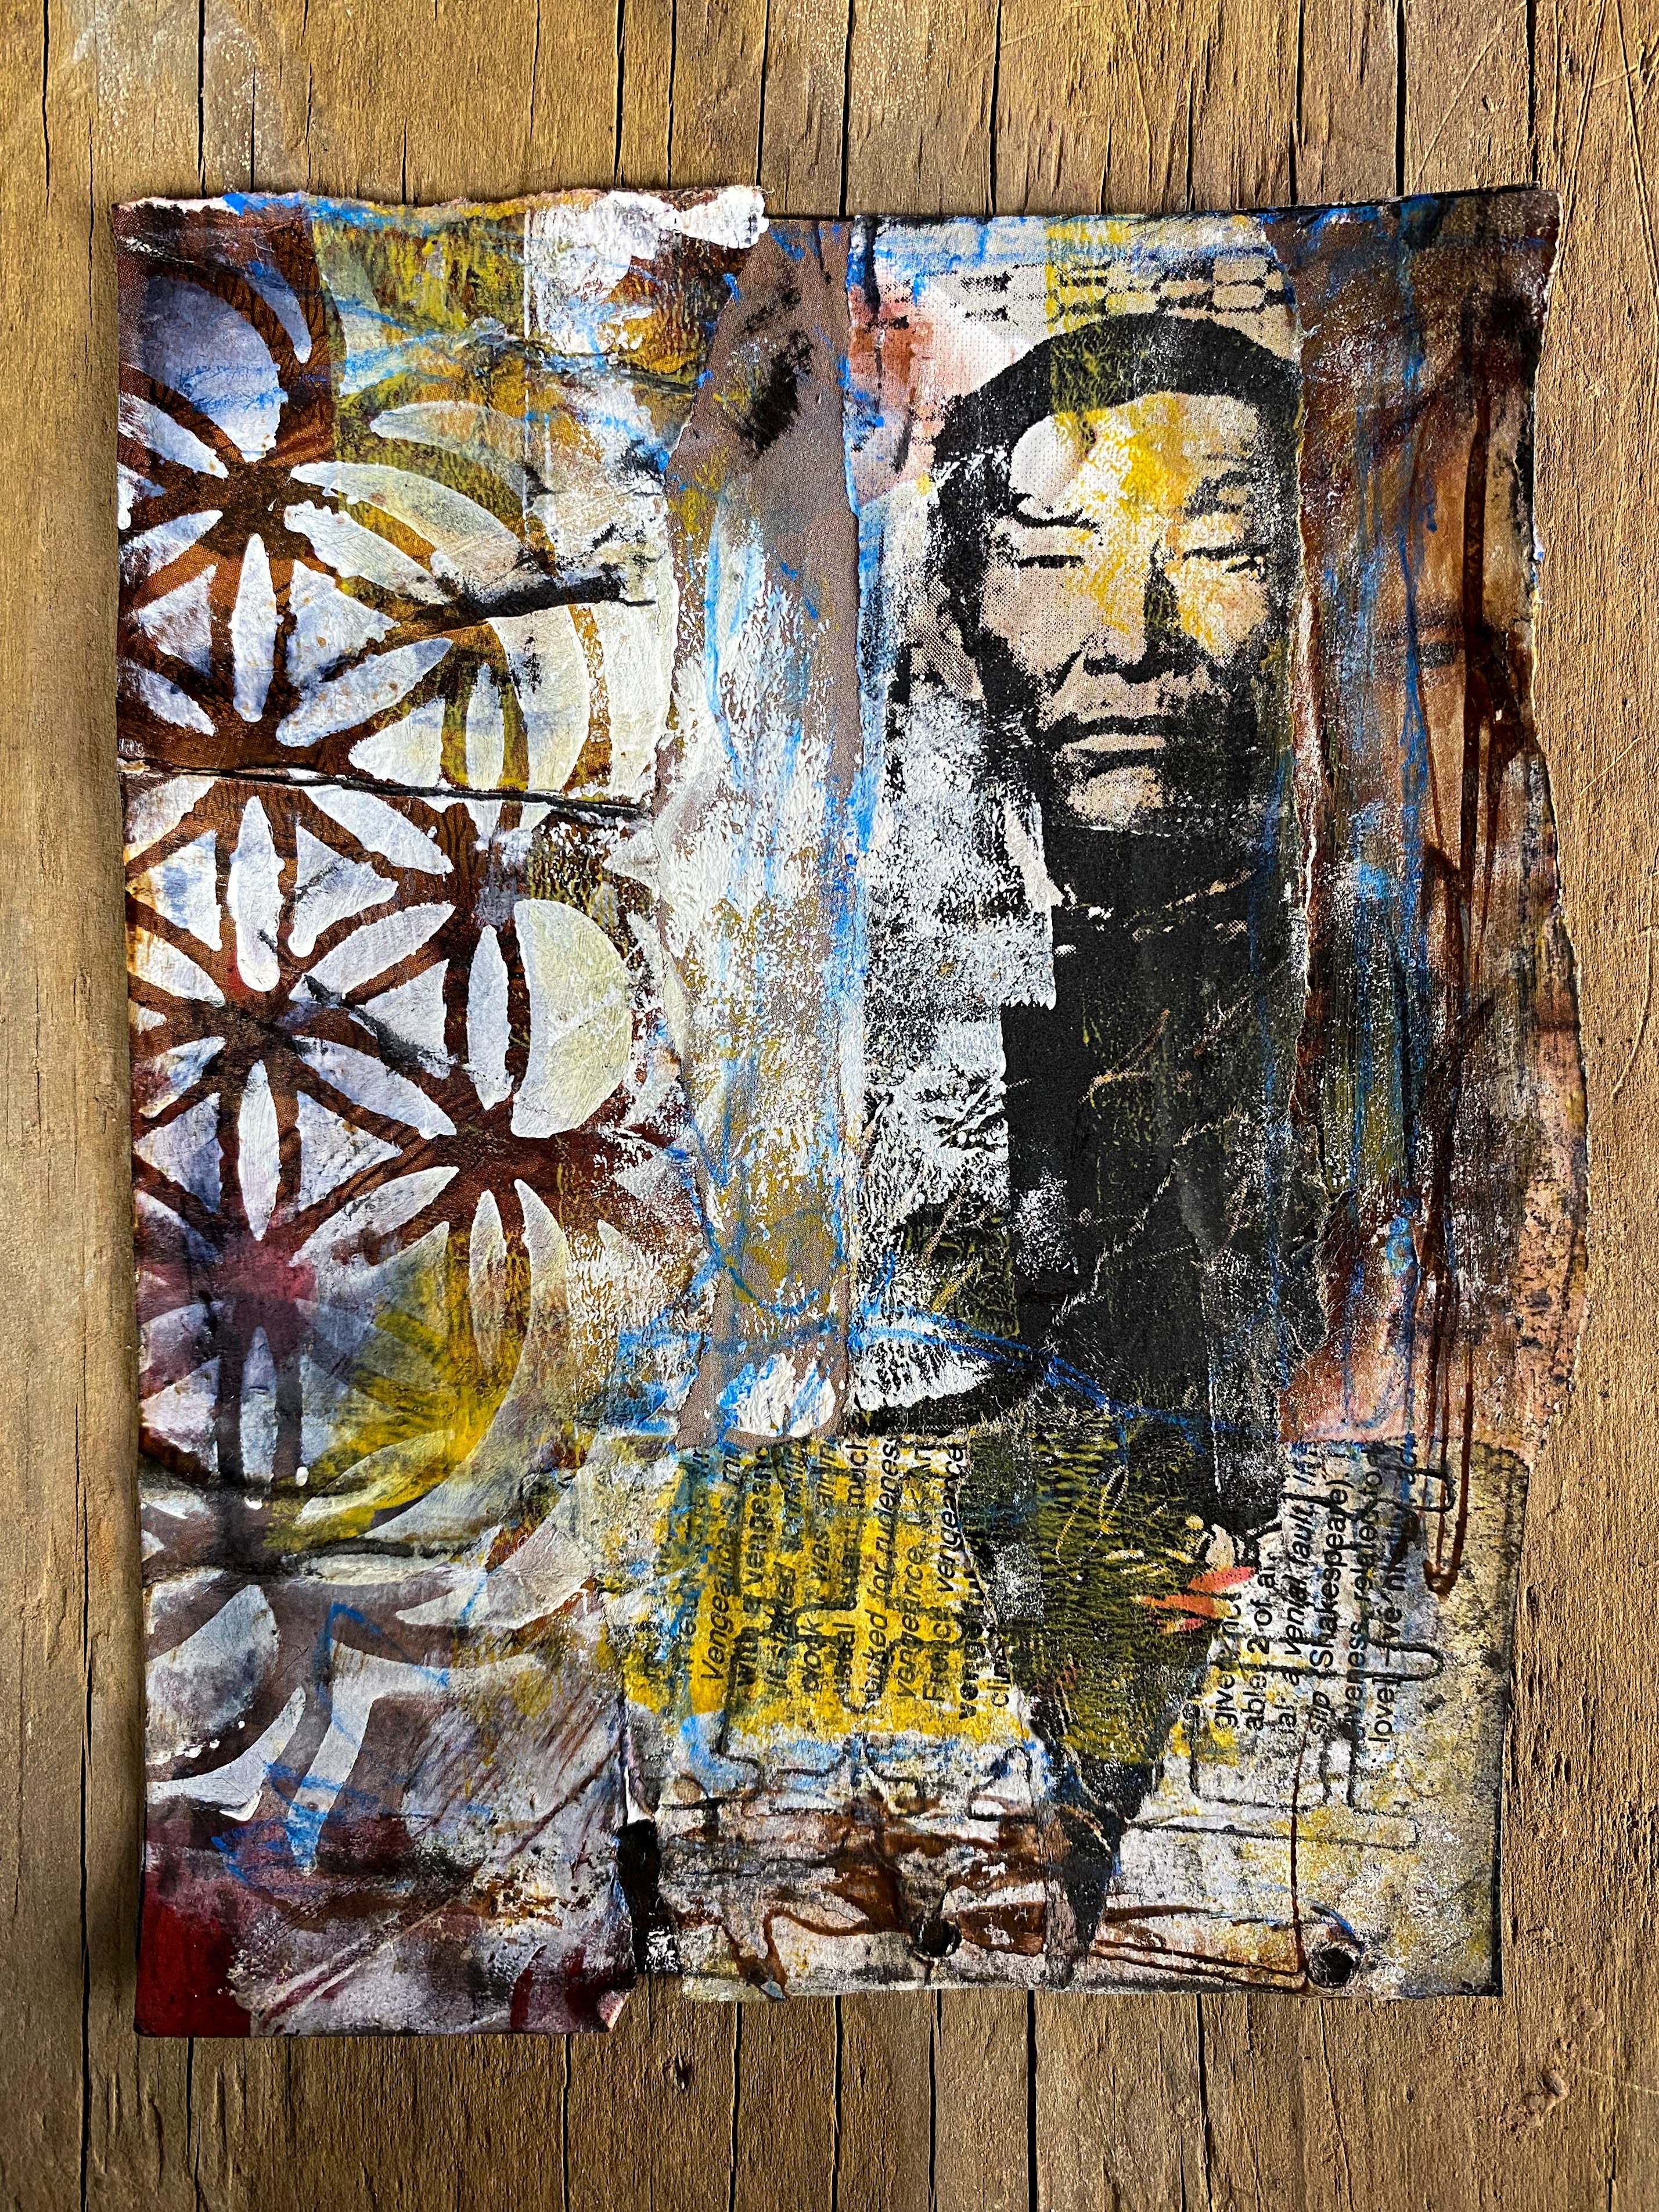 Connection - Original Mixed Media Collage